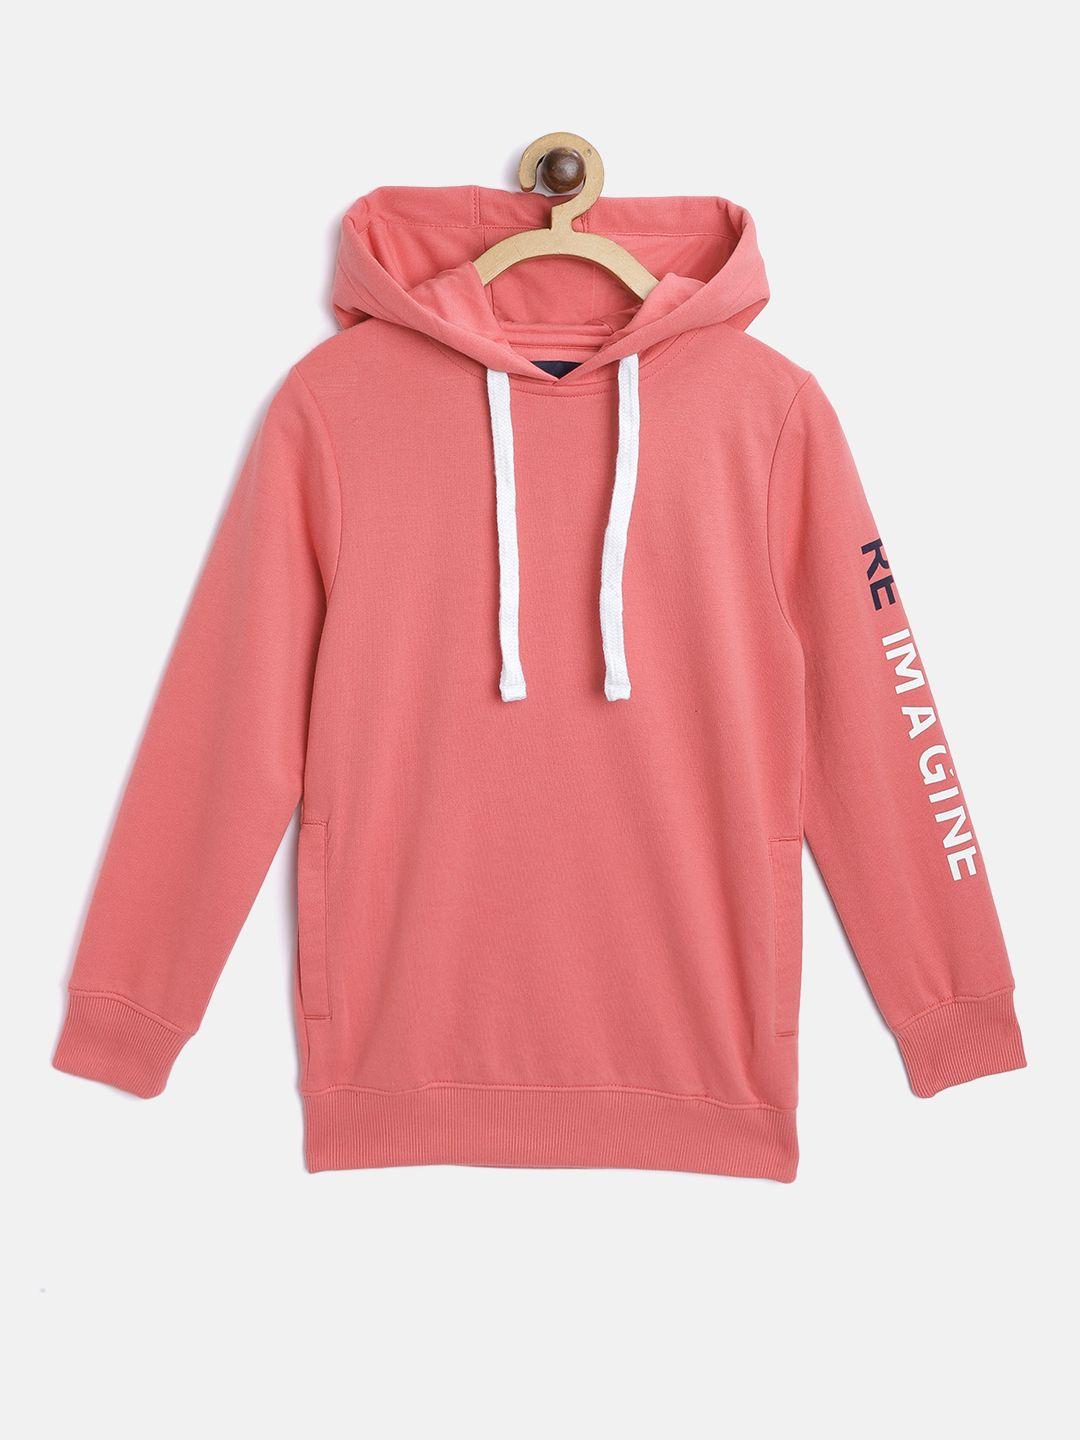 m&h juniors boys pink solid hooded sweatshirt with typography print detail